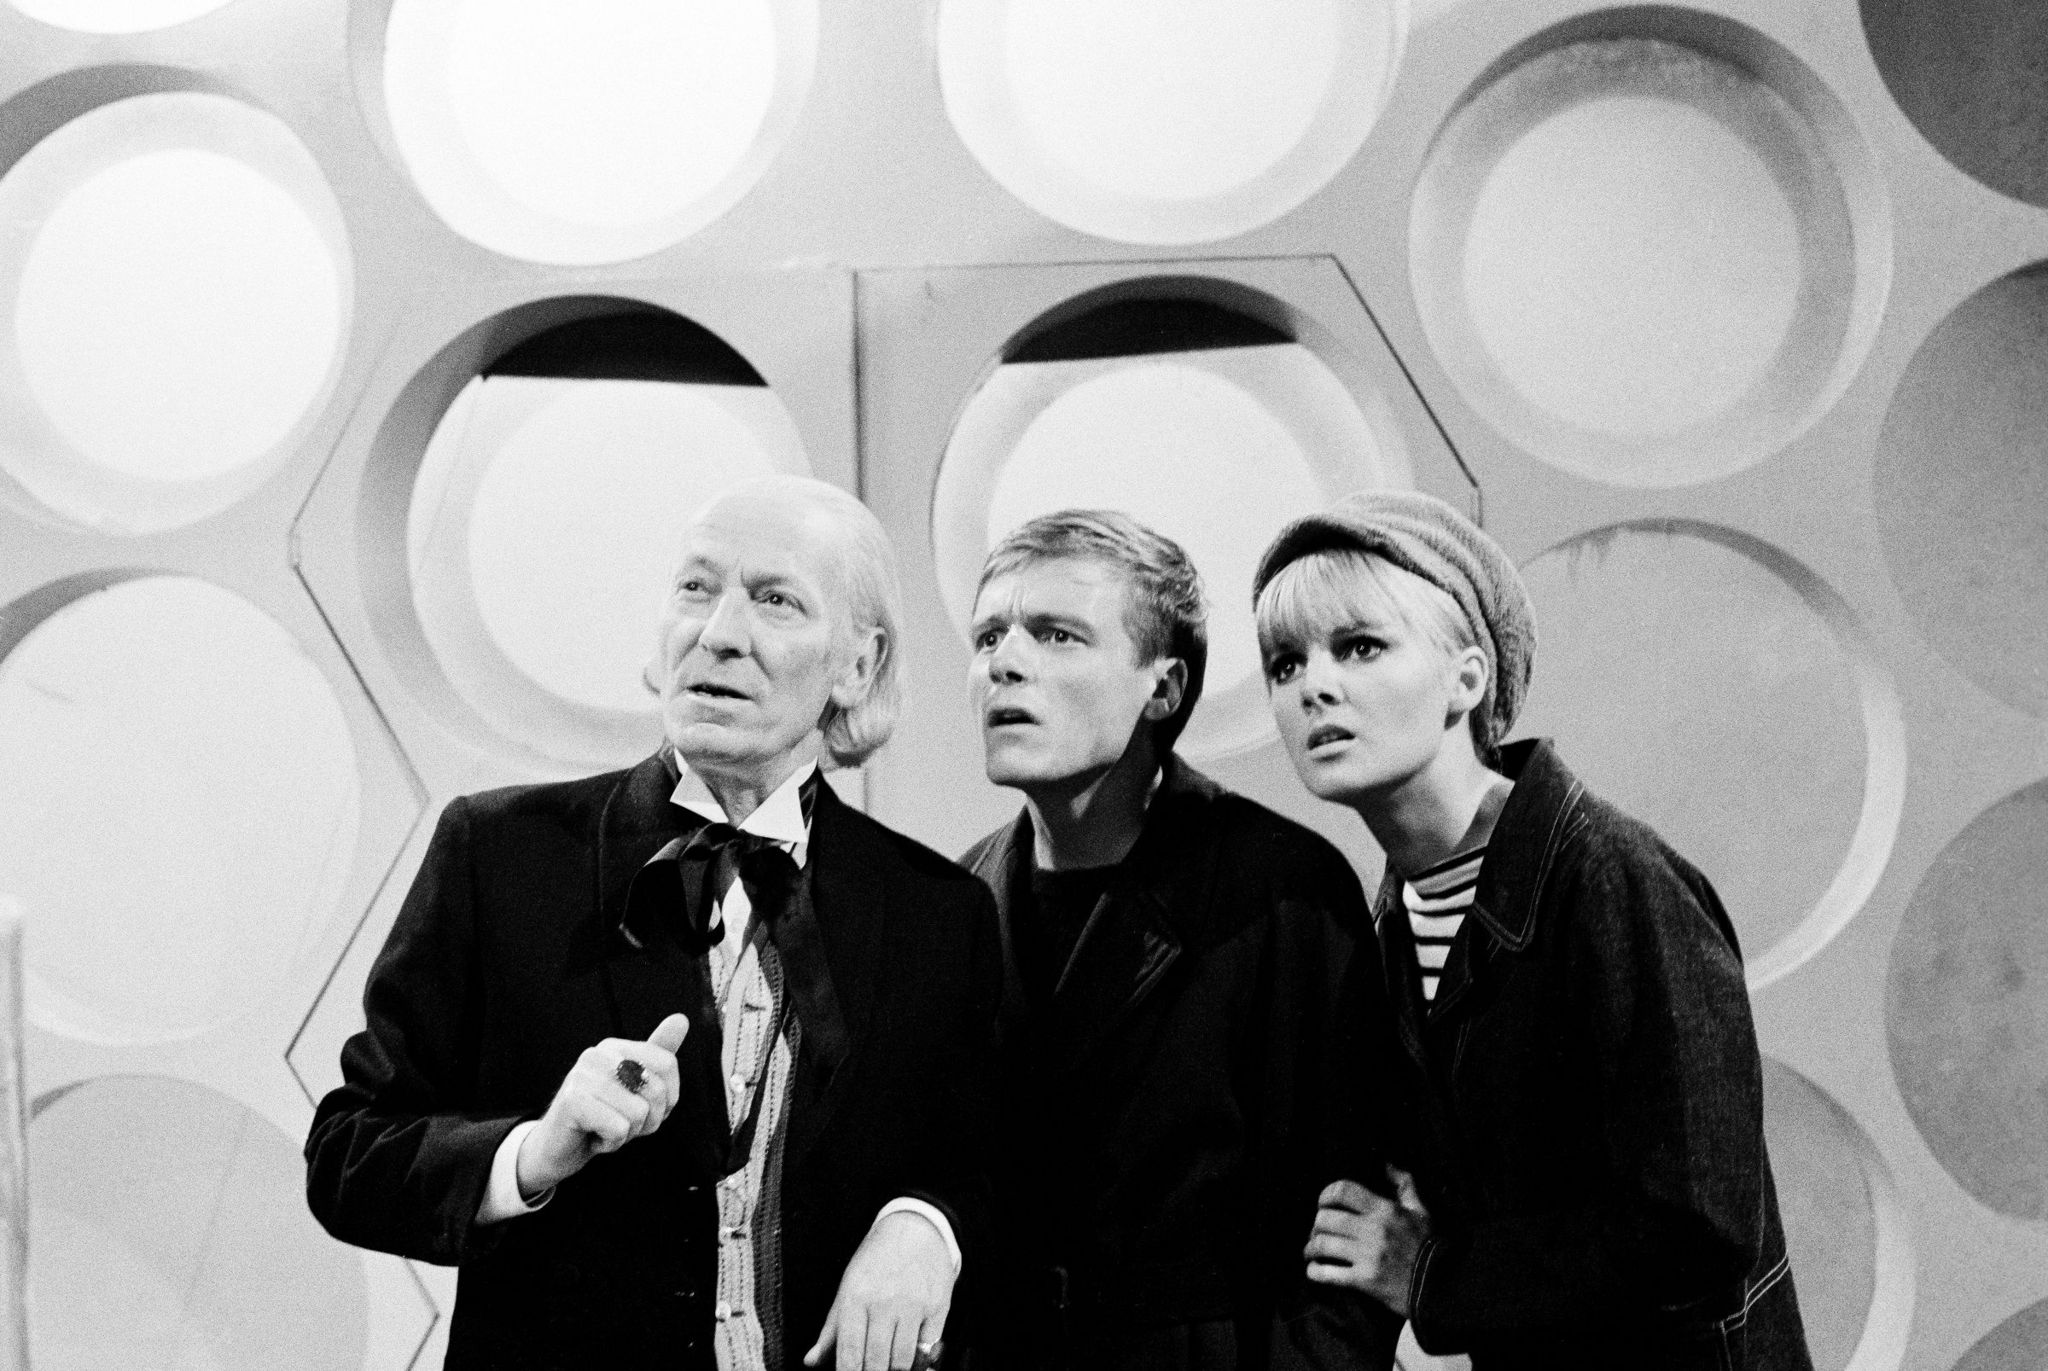 William Hartnell (The Doctor), Michael Craze (Ben) and Anneke Wills (Polly) inside the TARDIS in The Smugglers (1966)